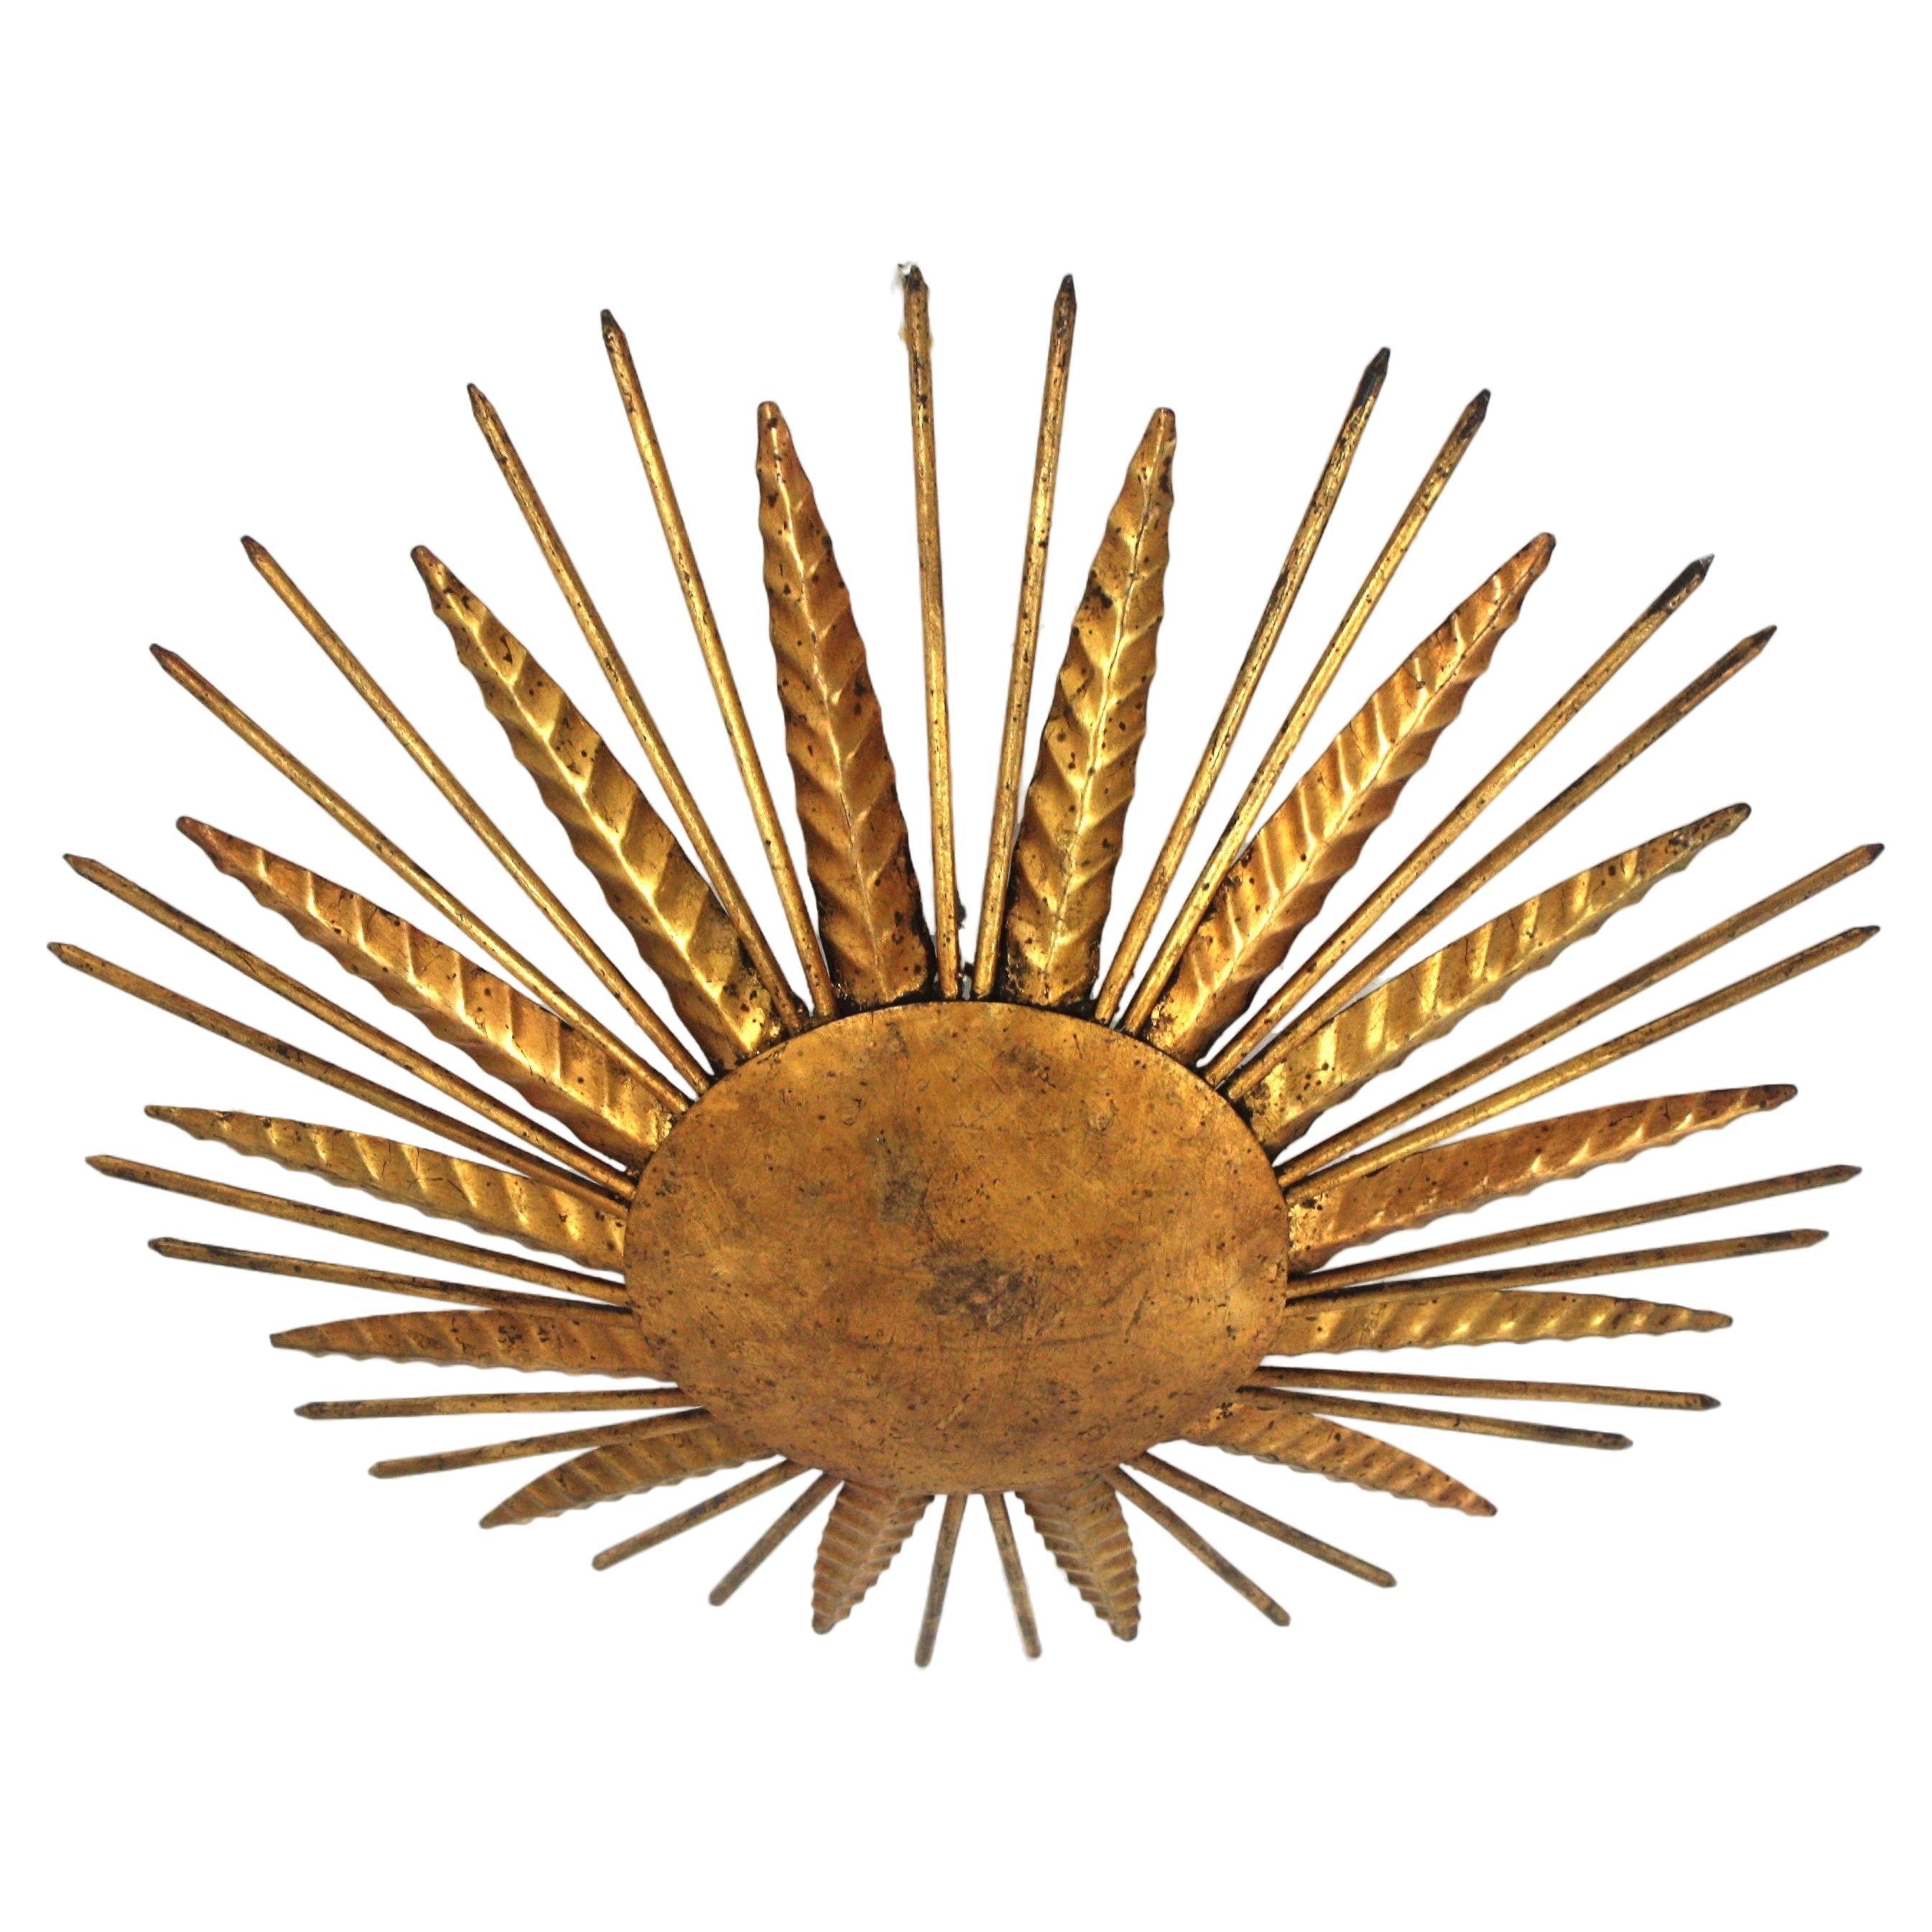 French modern neoclassical sunburst flush mount / wall light in gilt iron with spikey gilt nail rays. France, 1940s.
Outstanding hand-hammered gold leaf gilt iron leafed sunburst light fixture from the late Art Deco period.
Highly decorative design